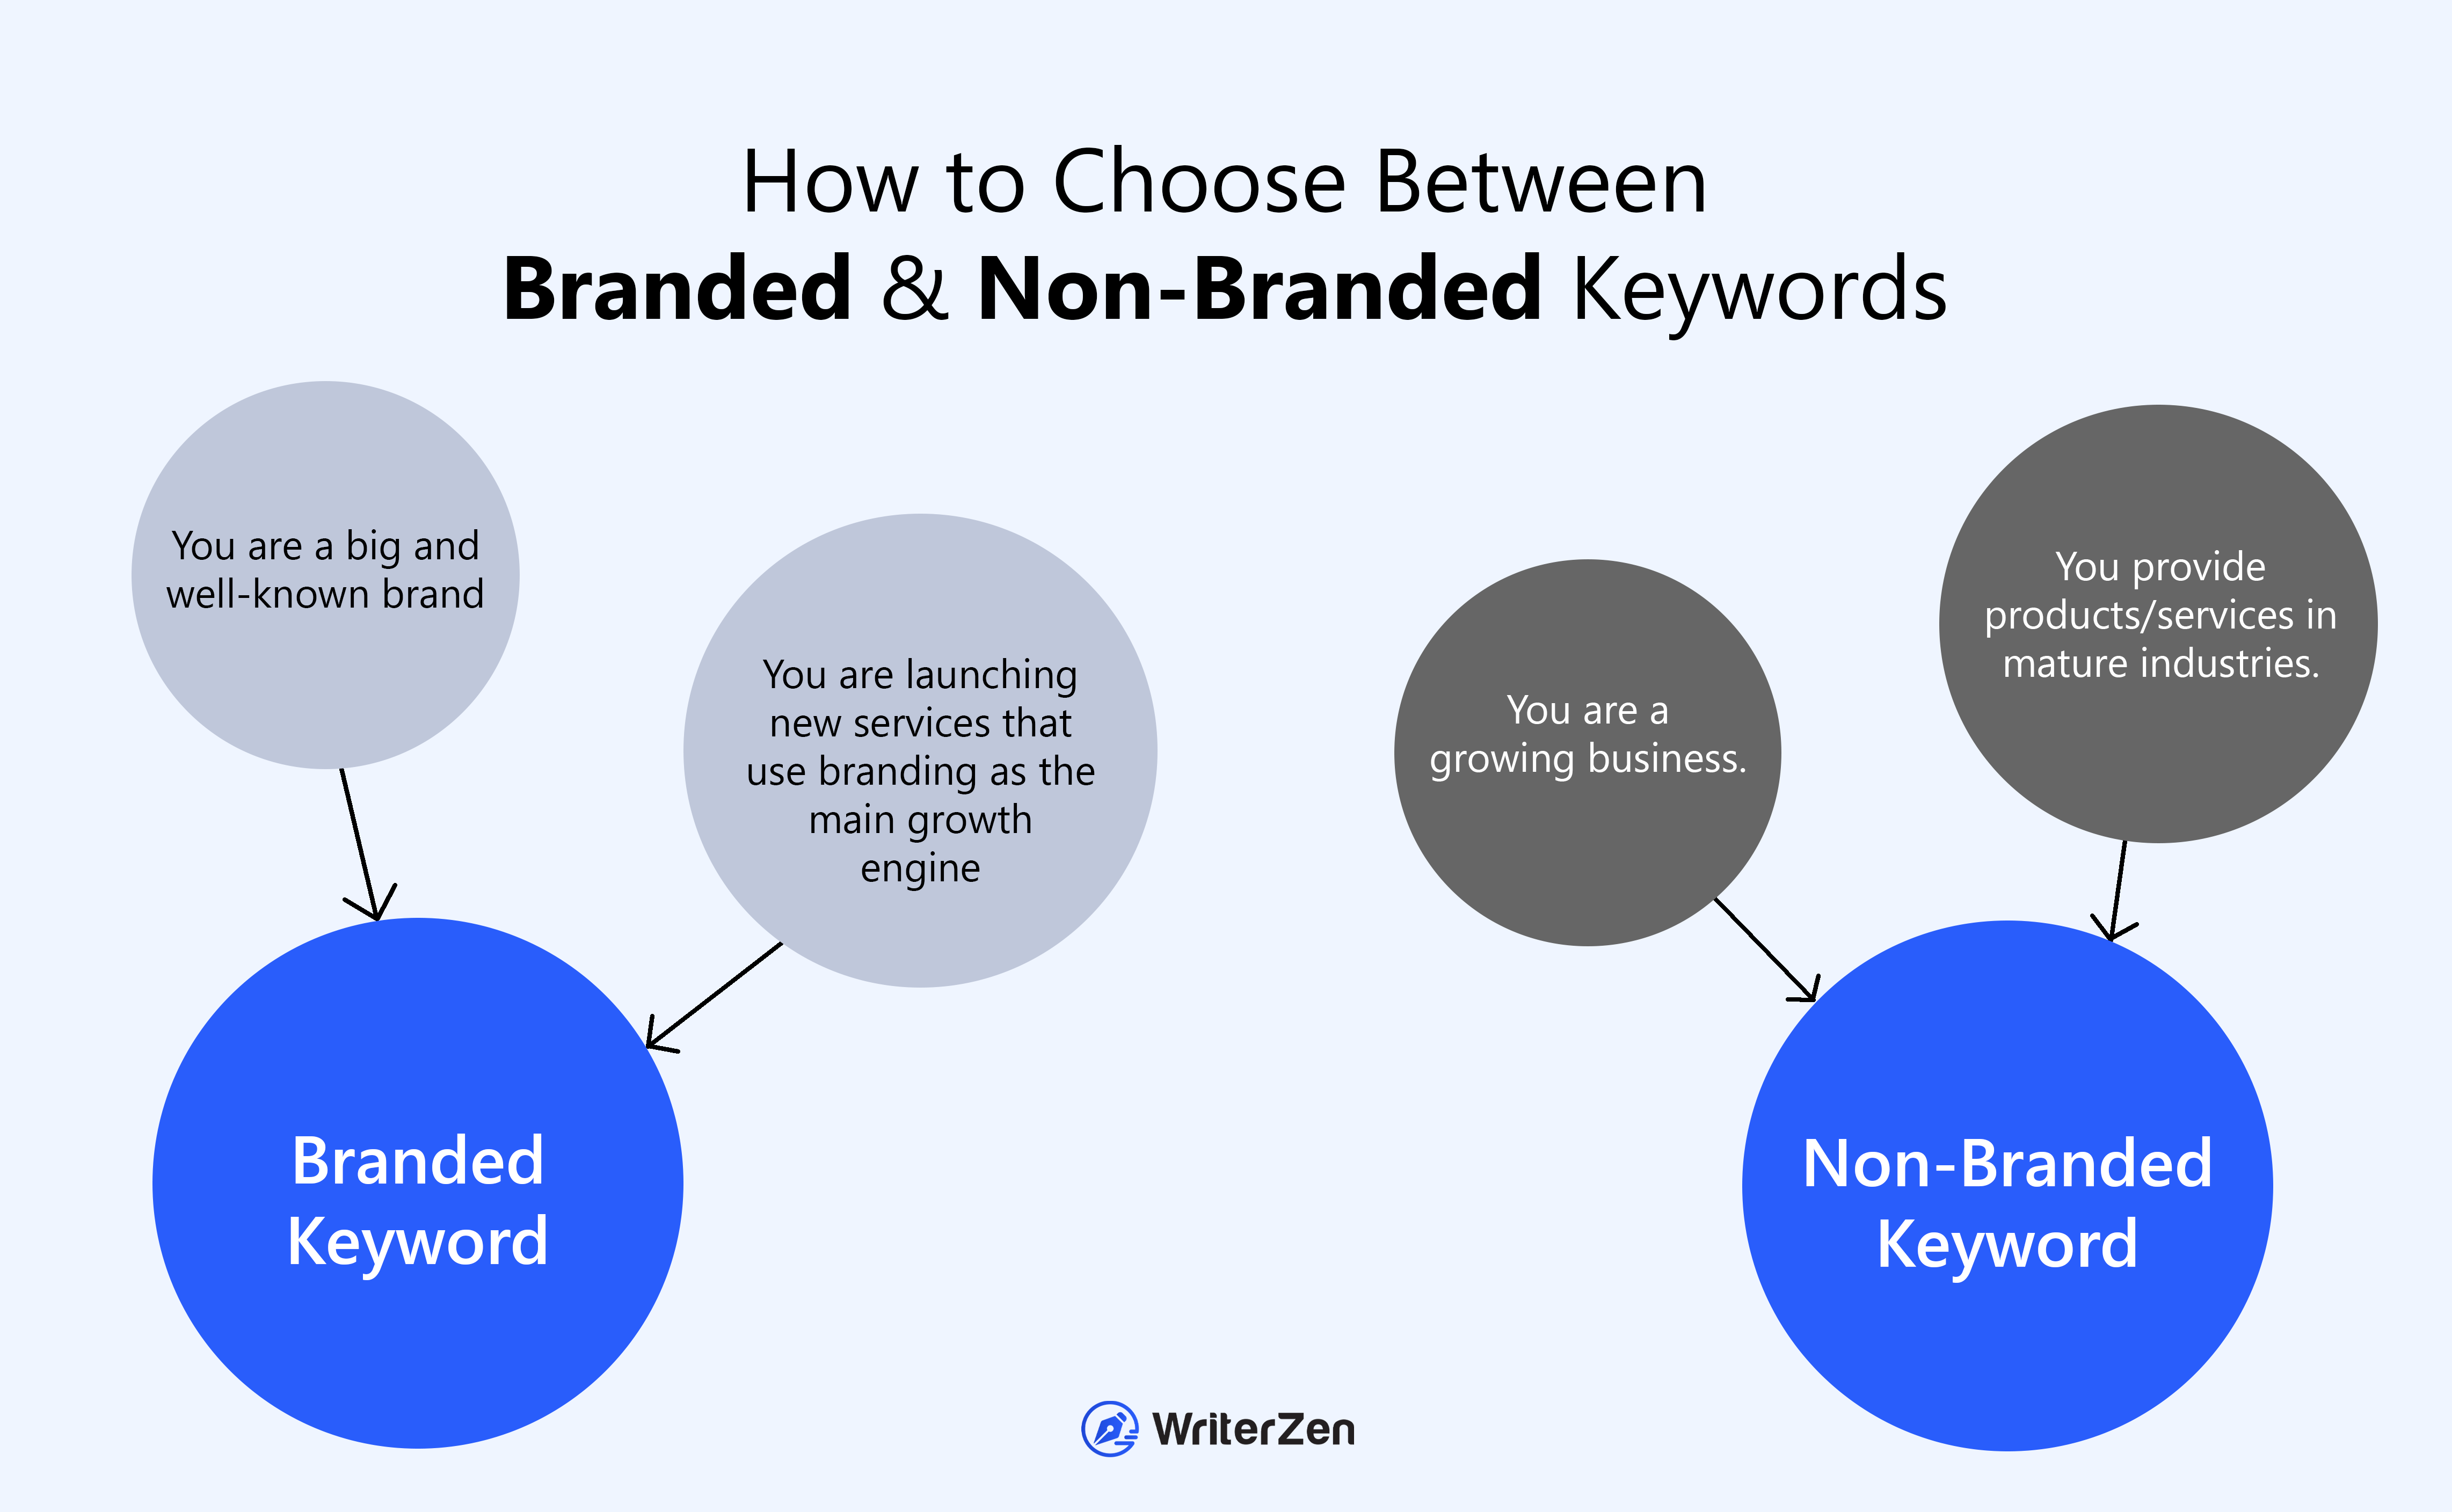 How to Choose Between Branded and Non-Branded Keywords